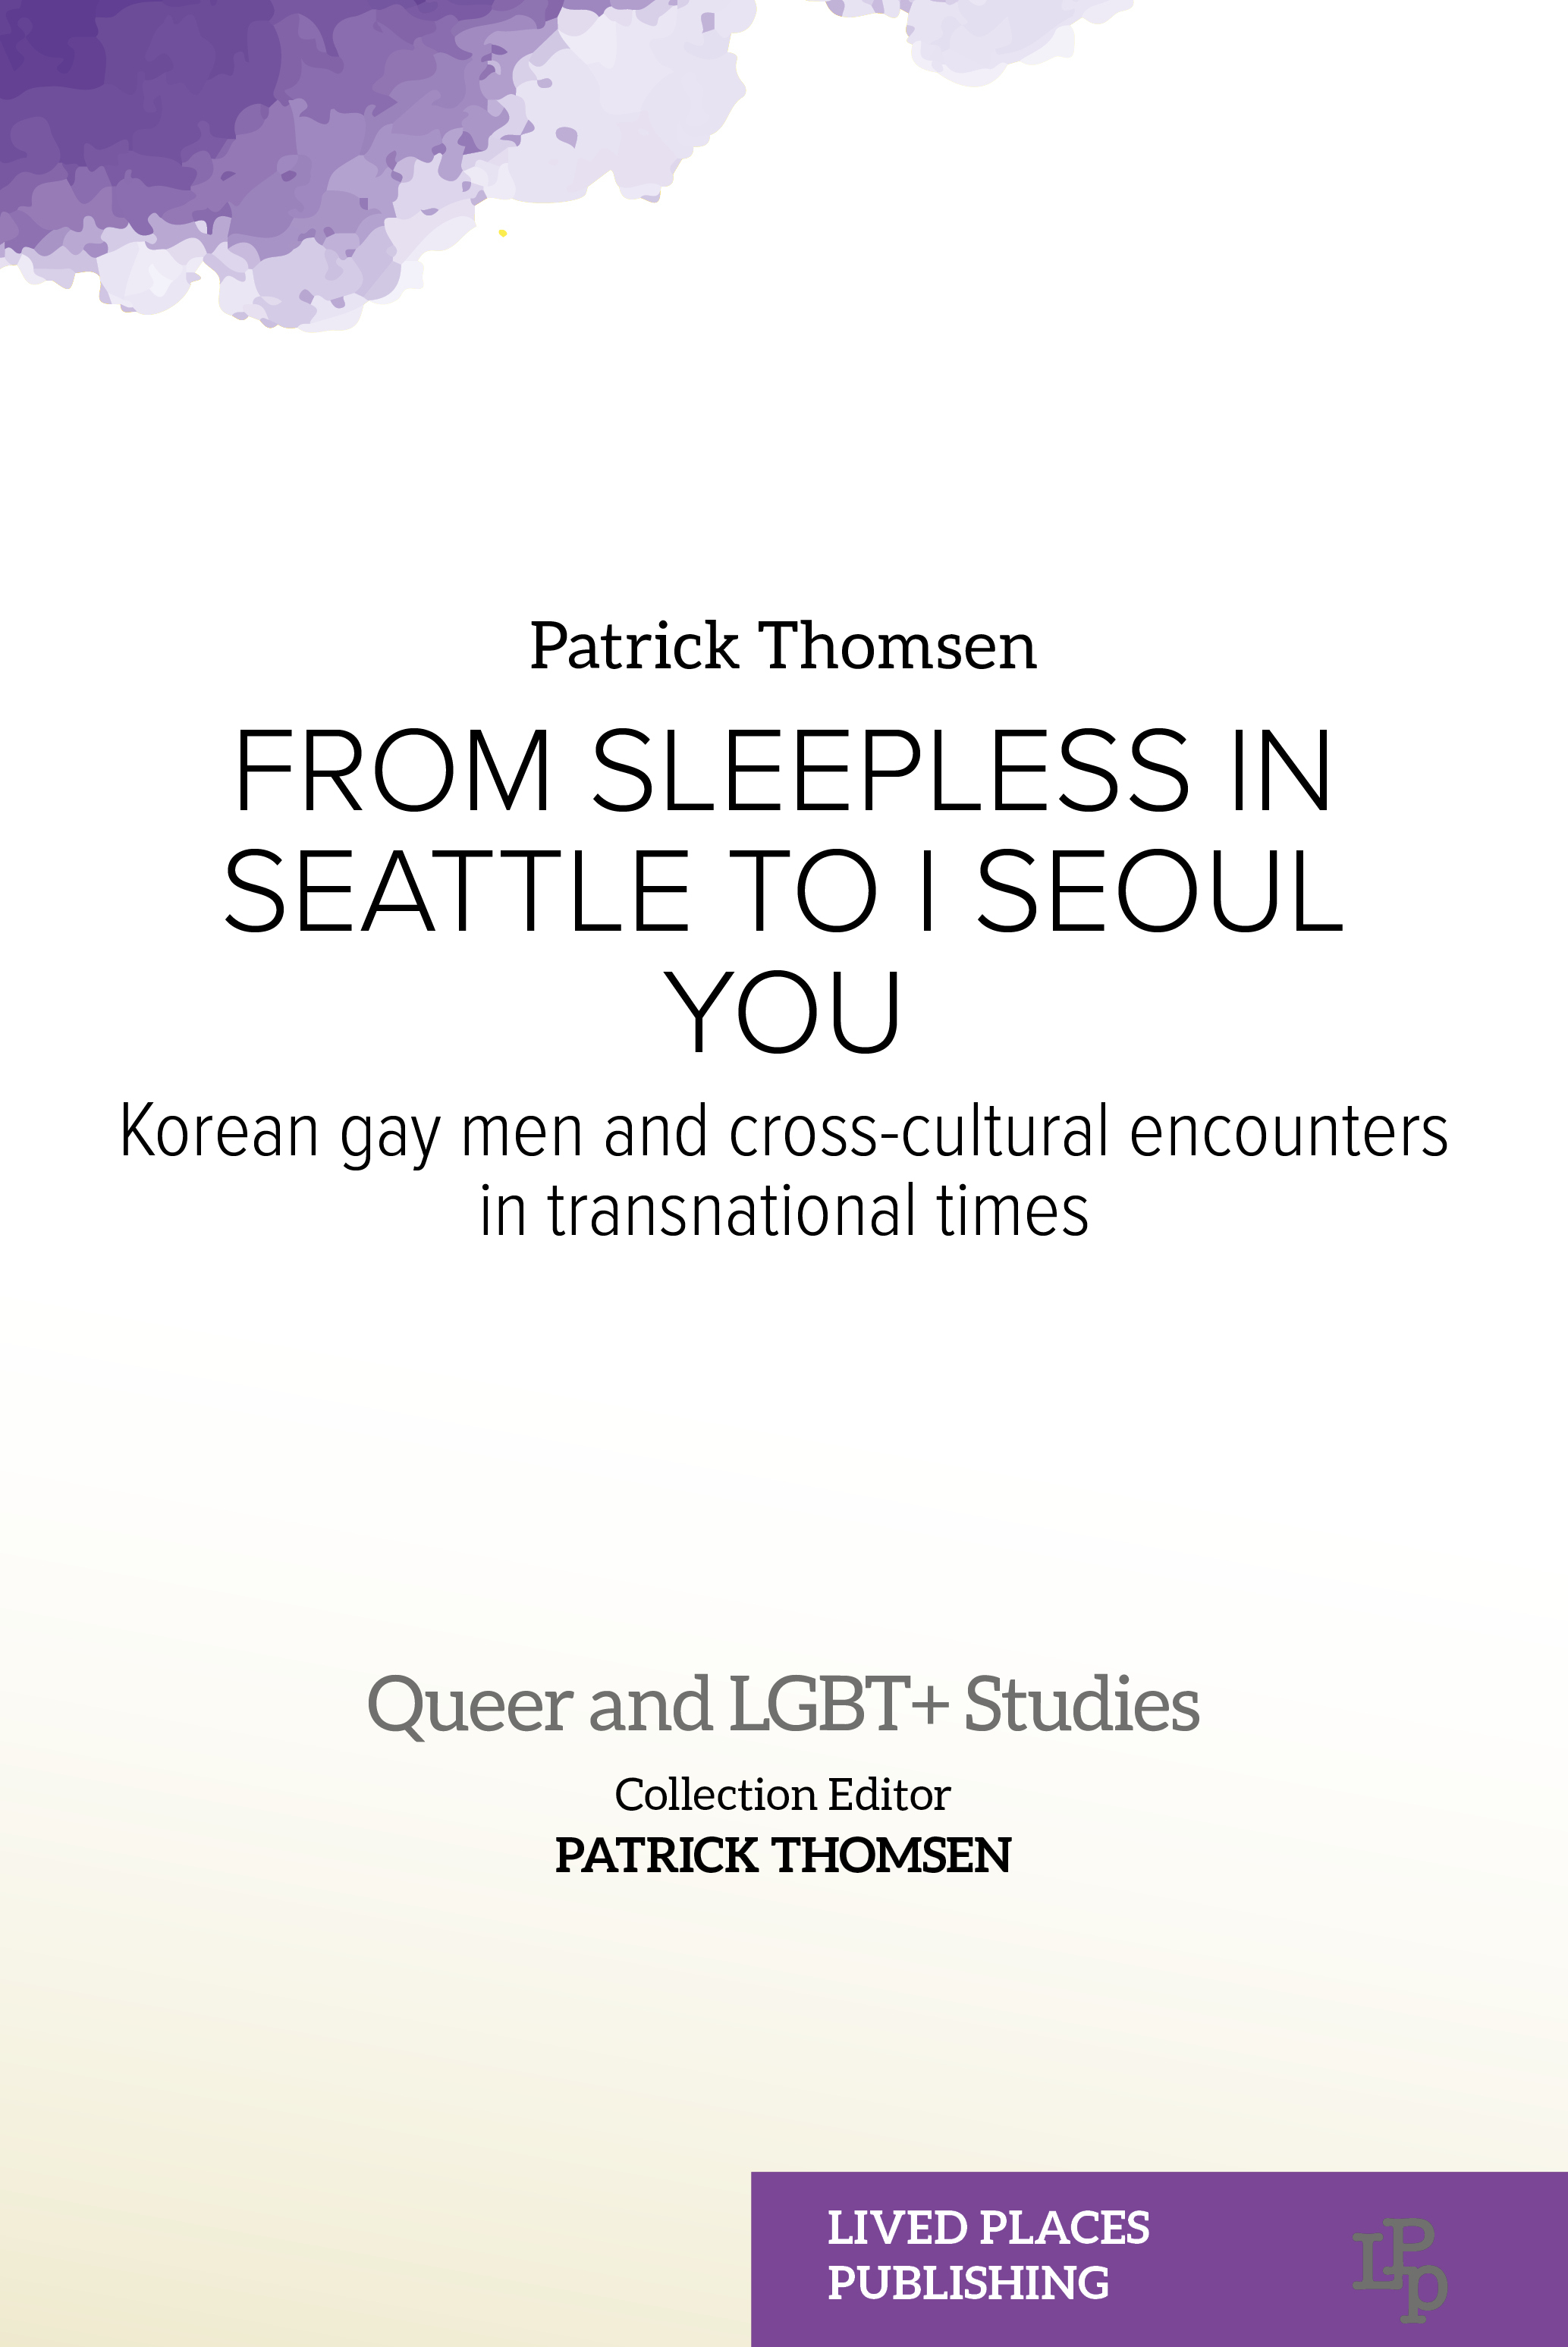 Queer and LGBT+ Studies